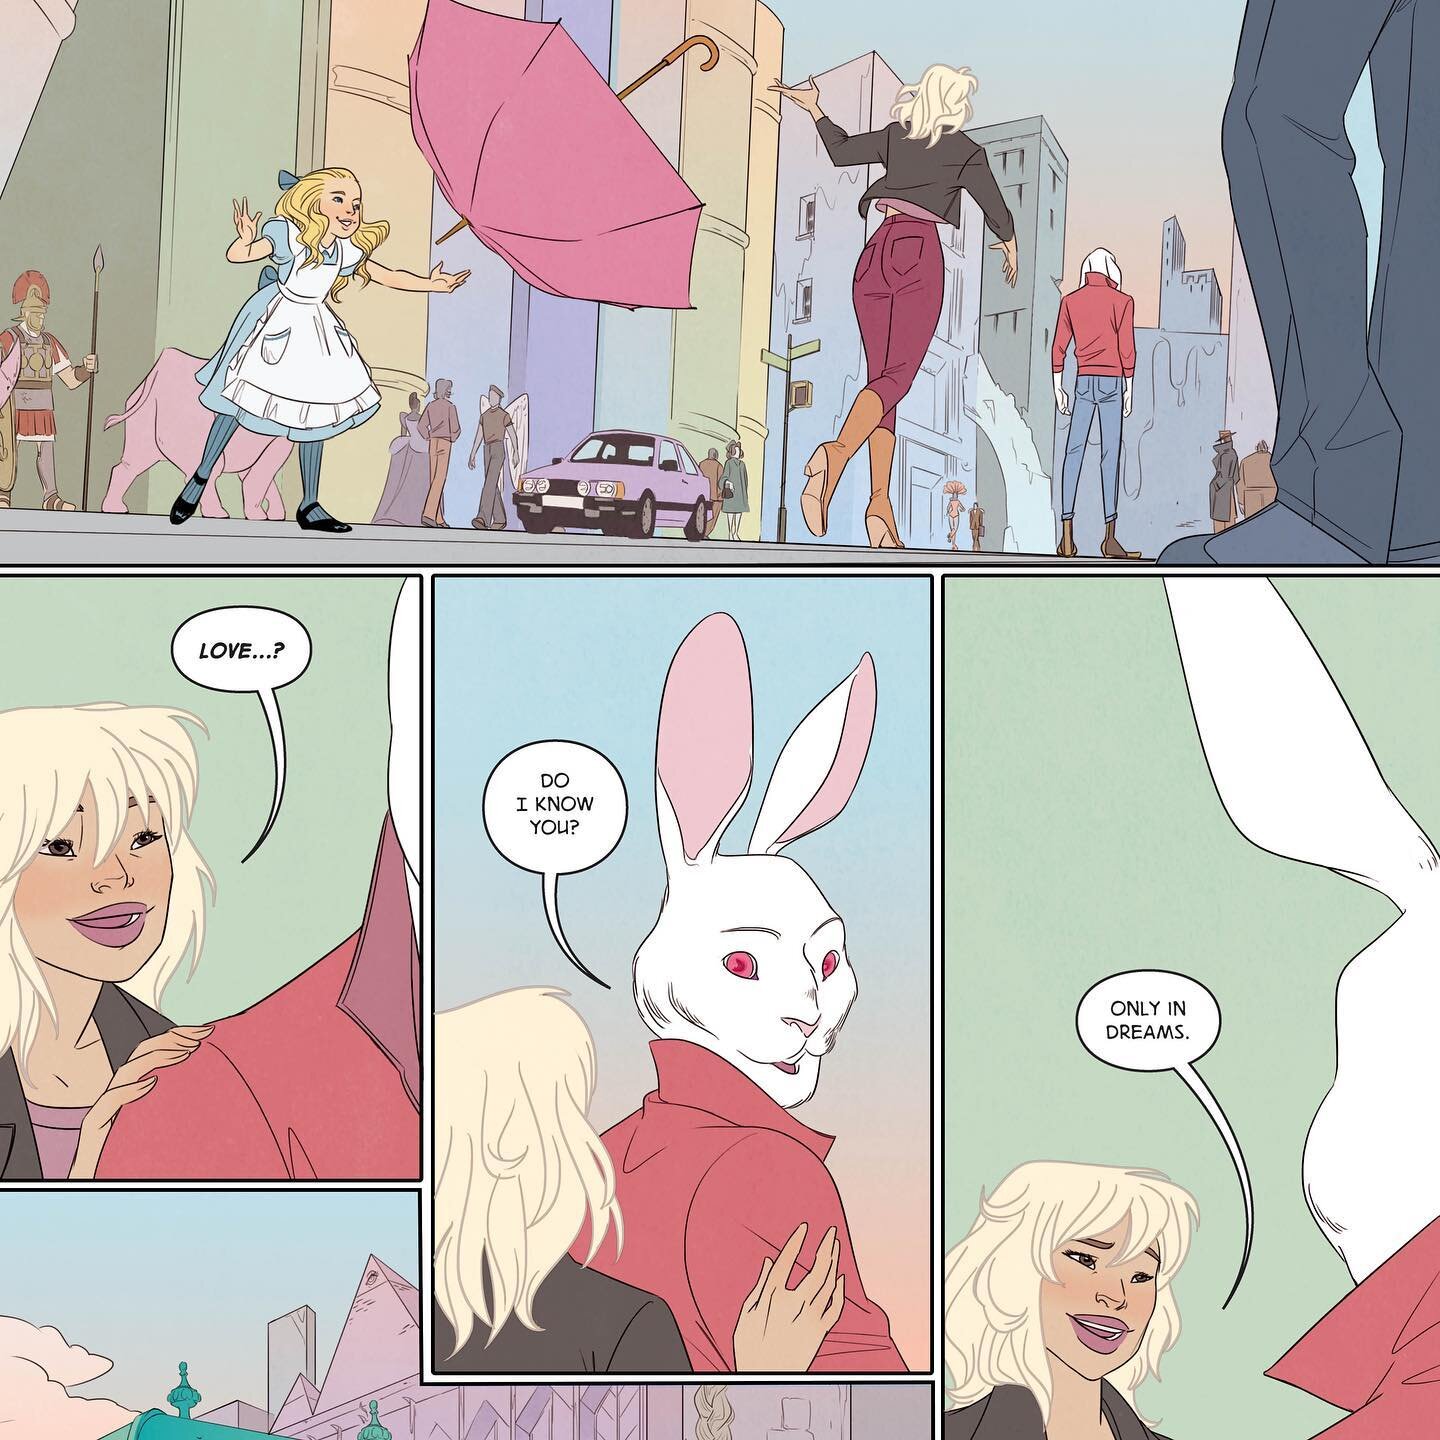 White Rabbit Day?? 🐇🍭😅
&hellip;
(Bunny excerpt from &ldquo;Dreaming.&rdquo; A @blondieofficial inspired comic feat. art by me, words by @david_avallone_freelance, published by @z2comics!) 😮&zwj;💨

#dreaming #blondie #comicart #whiterabbit #alice